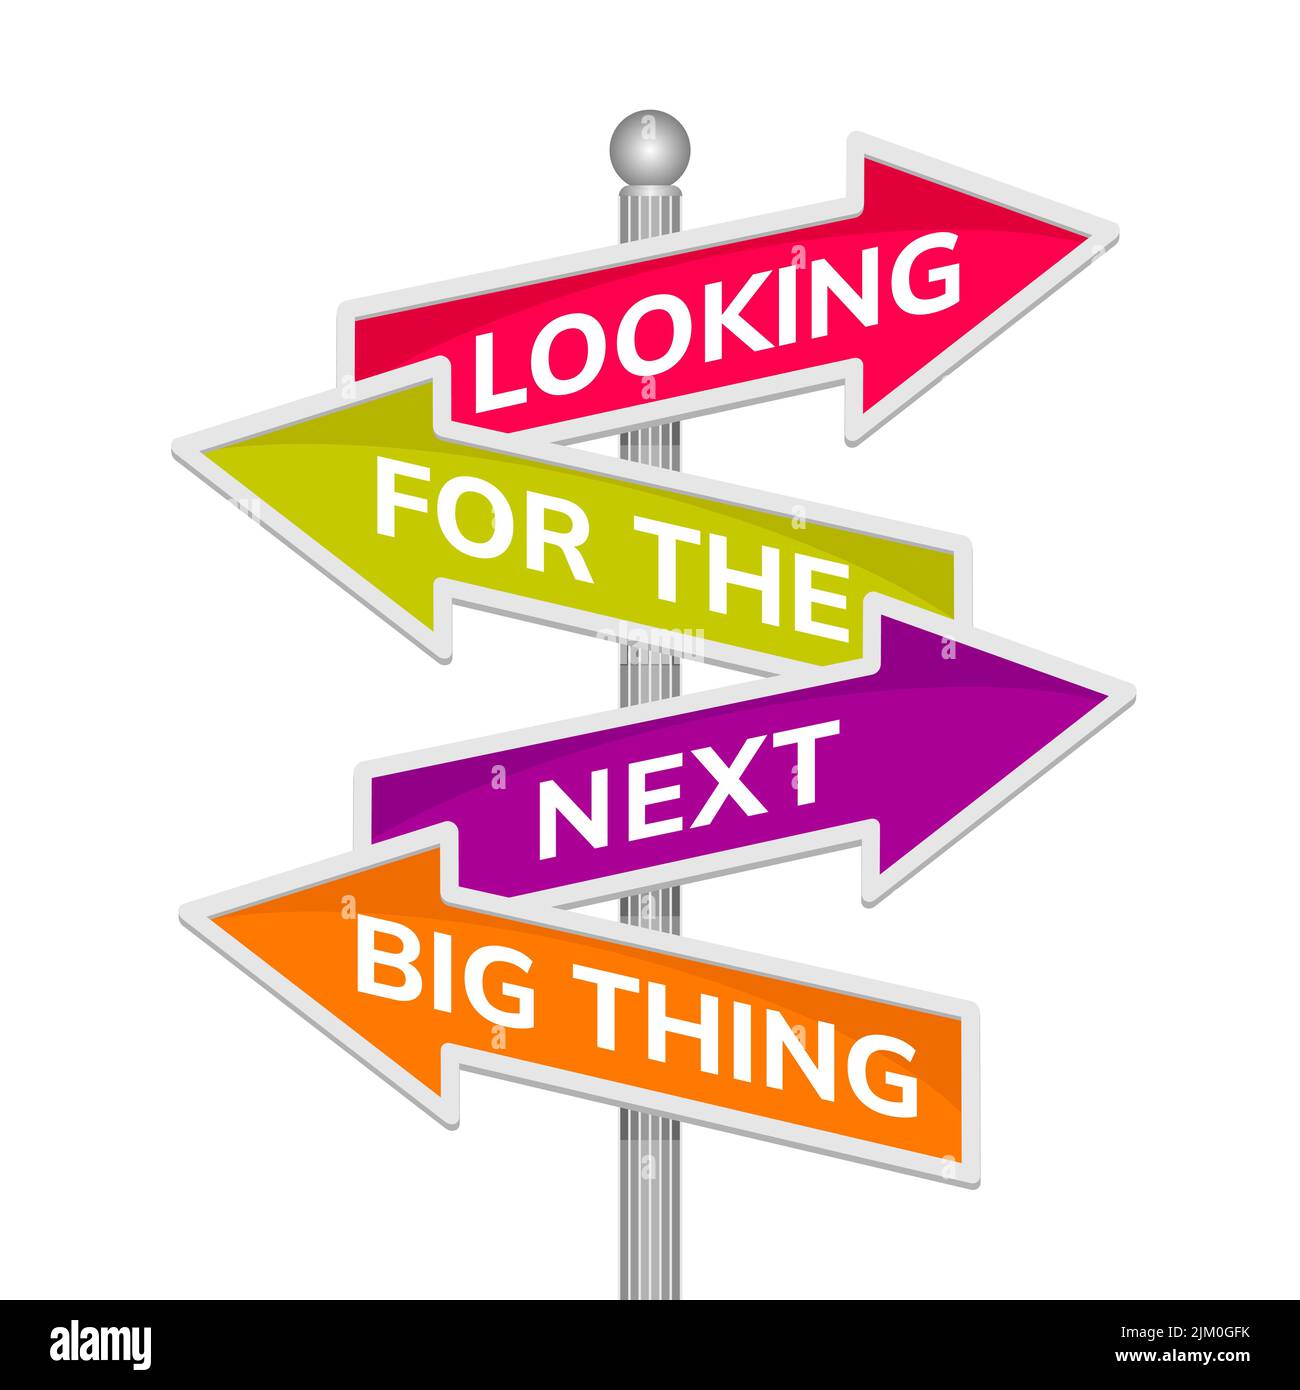 Looking for the Next Big Thing phrase on guidepost isolated on white background Stock Vector